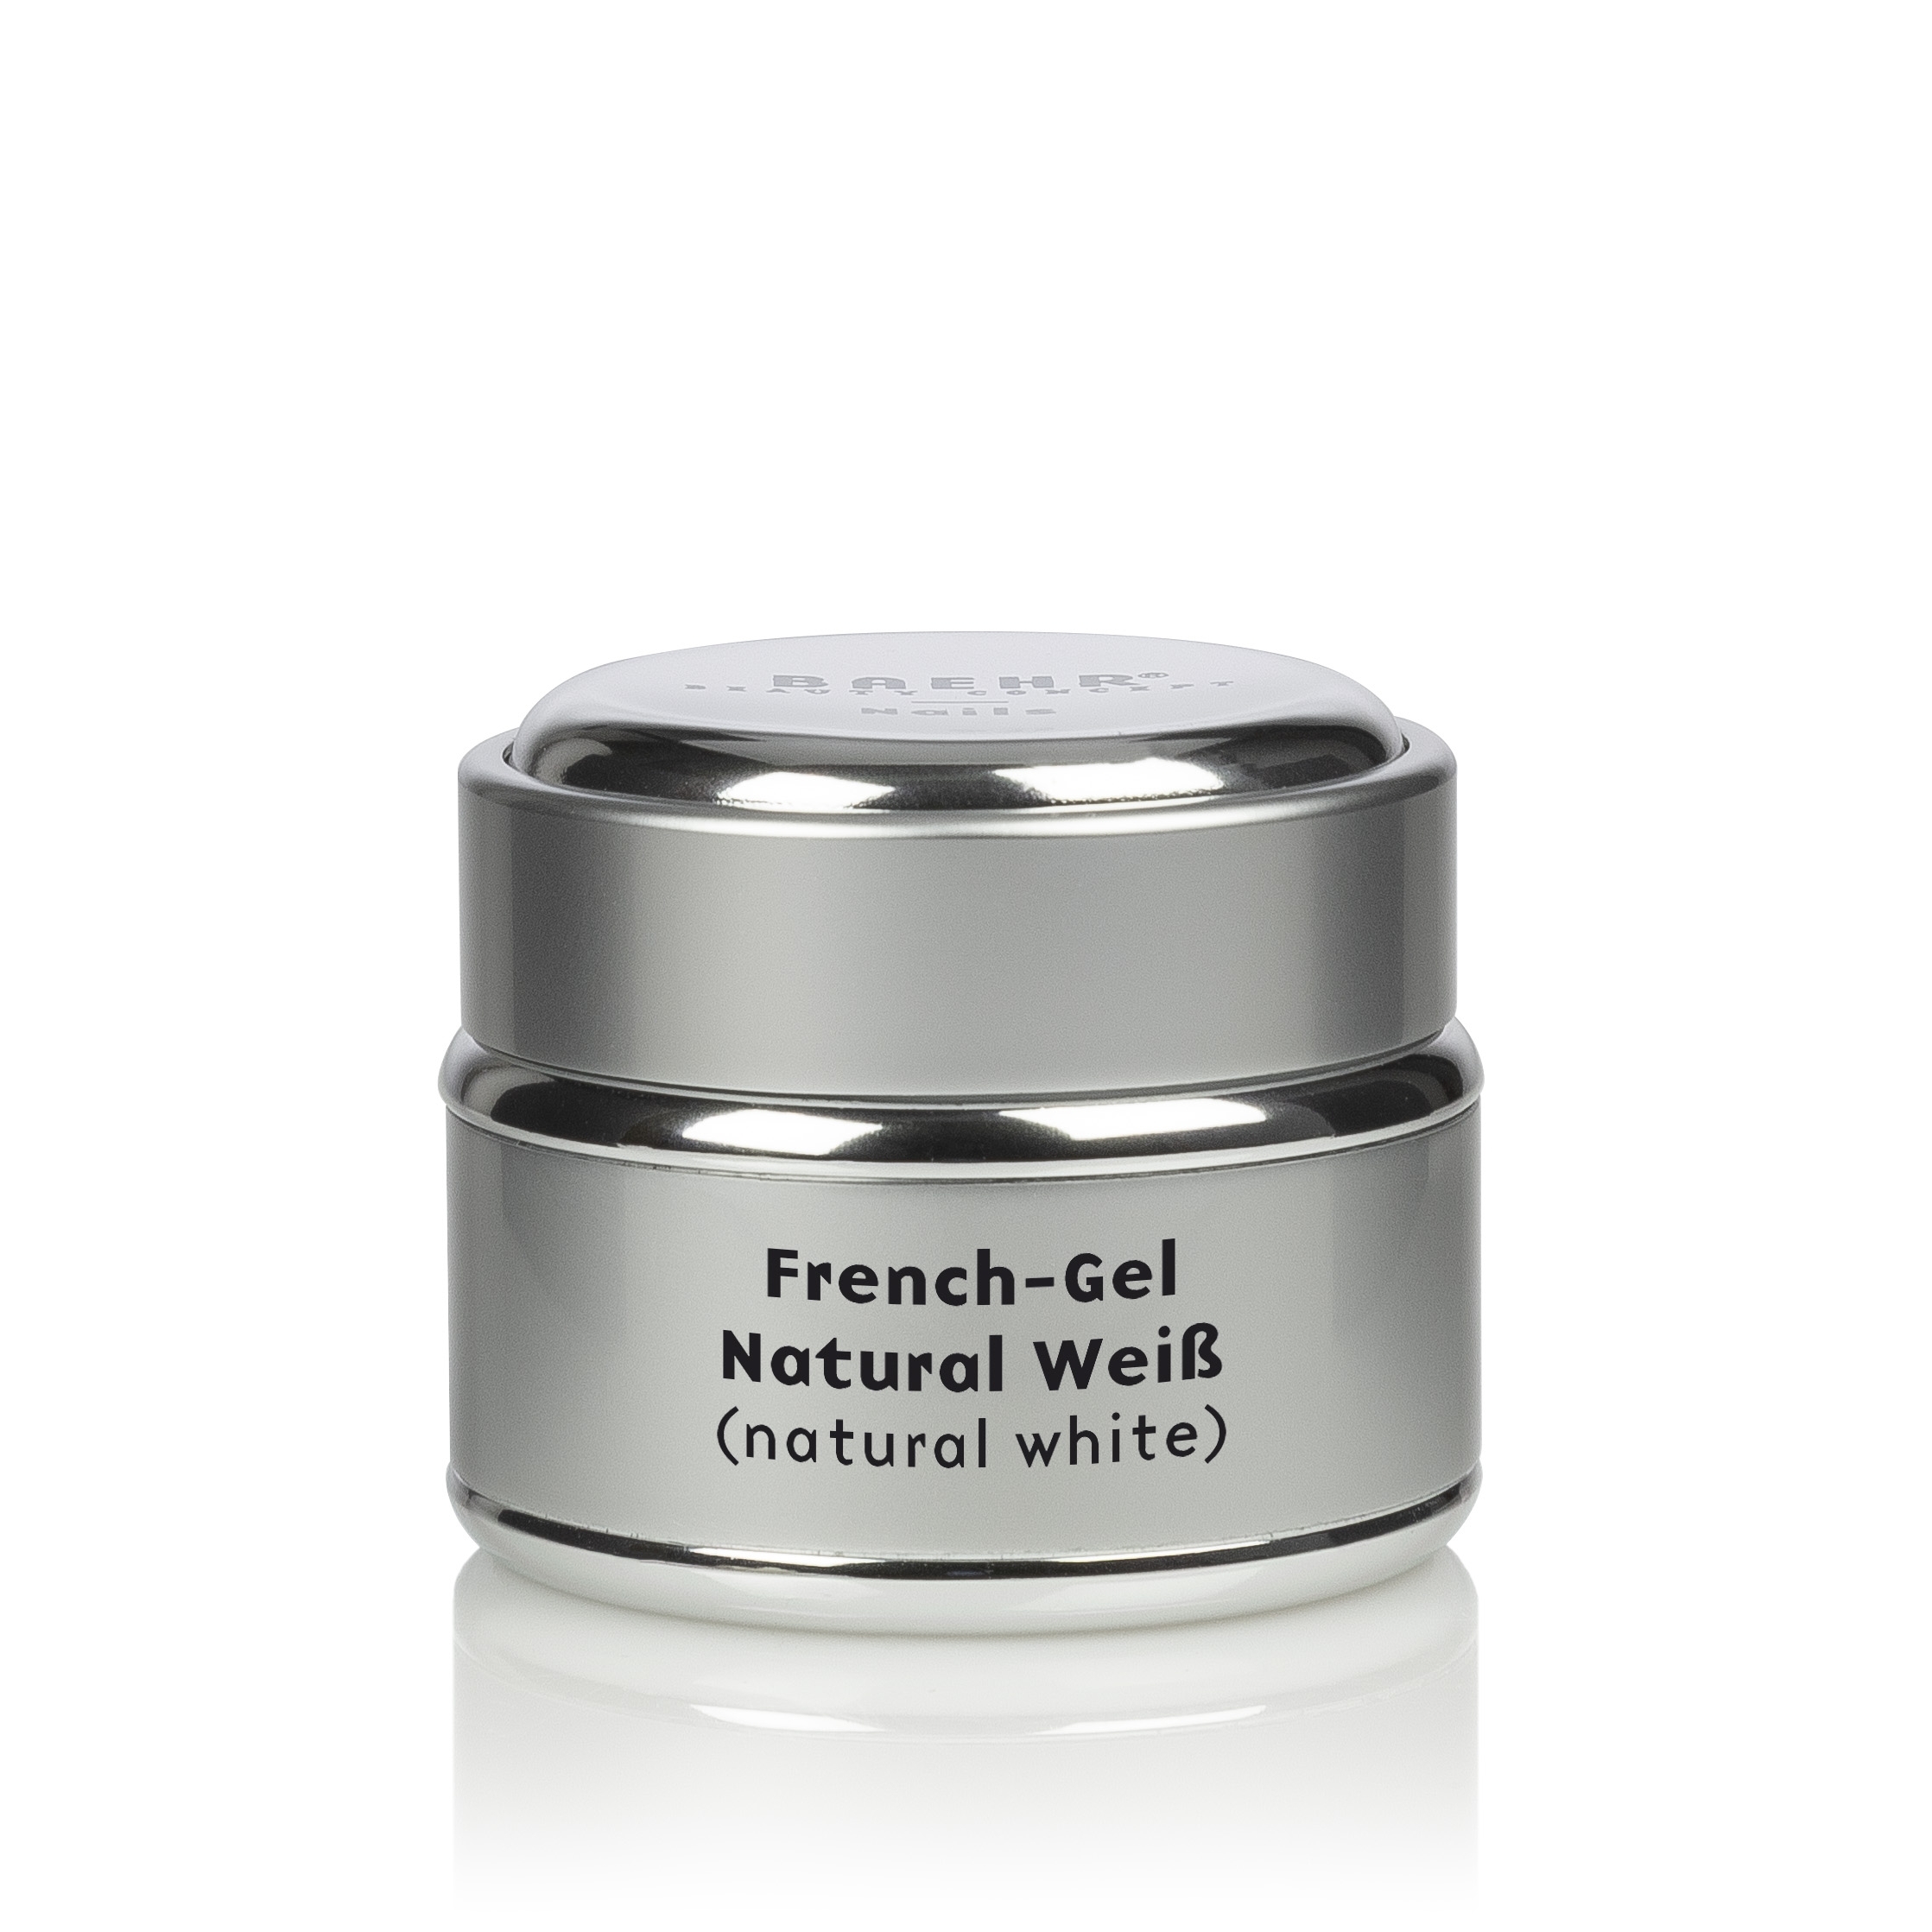 BAEHR BEAUTY CONCEPT - NAILS French-Gel Natural Weiß 30 ml